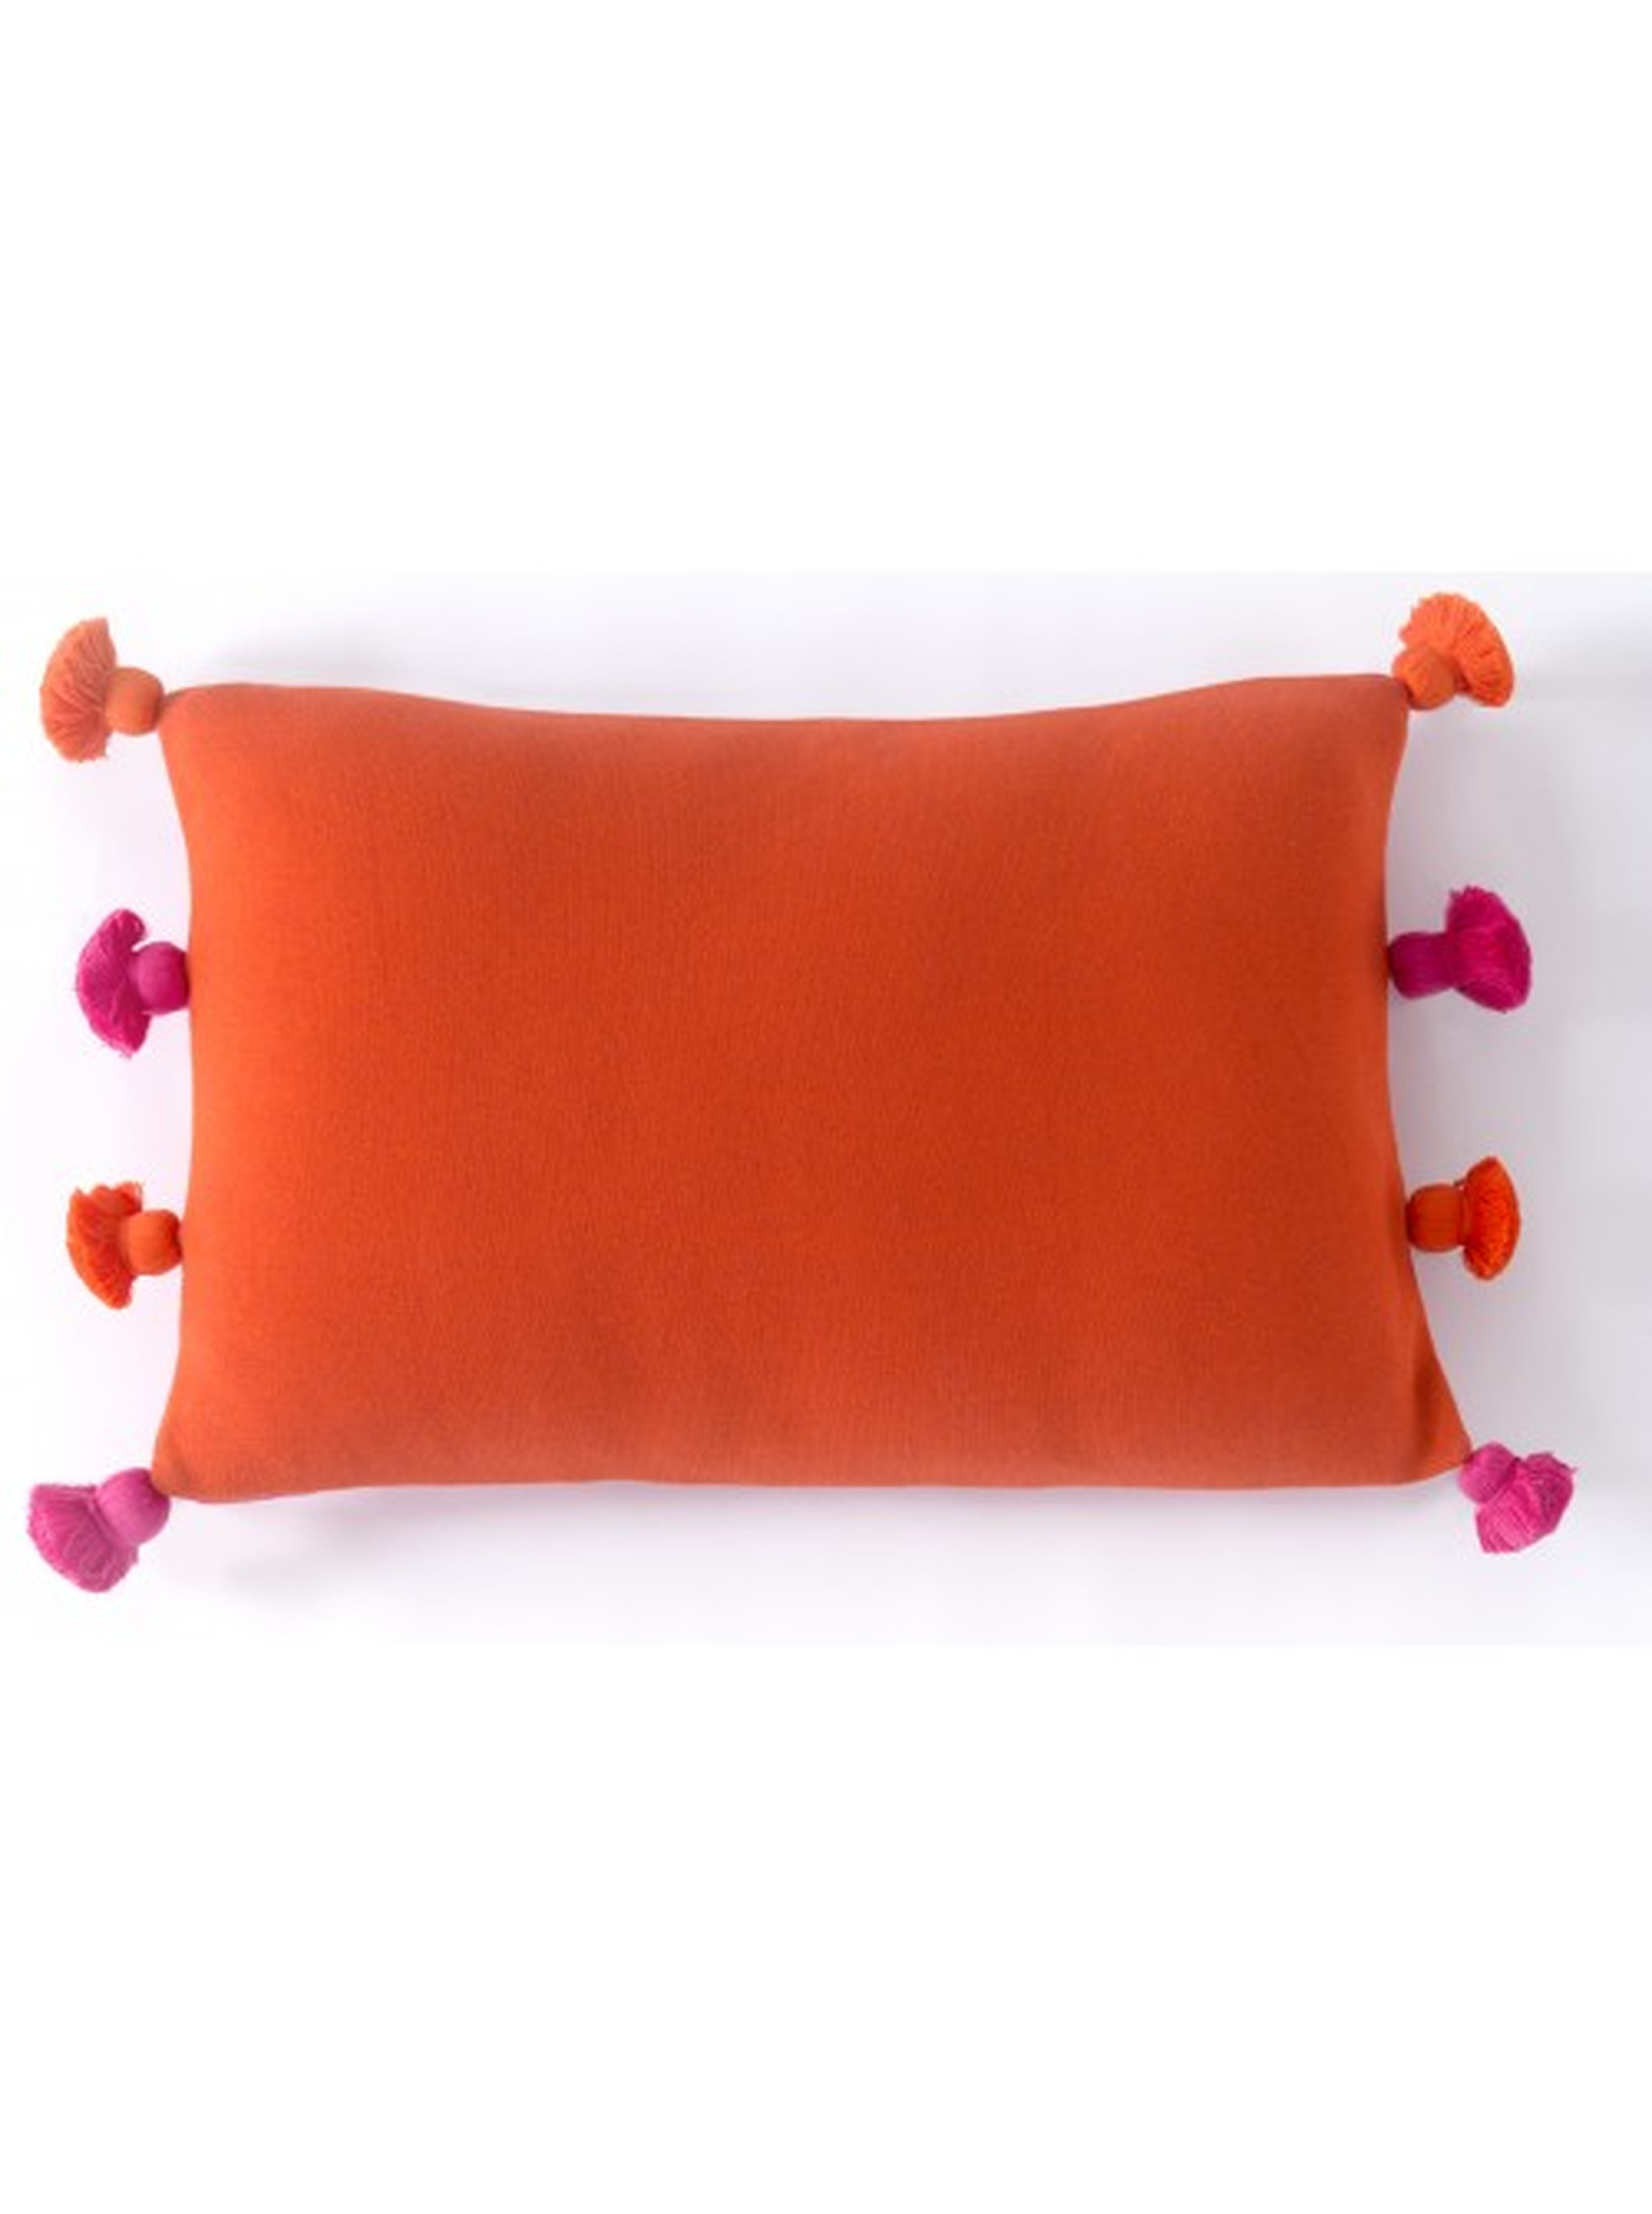 PAVIA PILLOW, TANGERINE AND HOT PINK - 16" x 24" - Polyester Filled - Lulu and Georgia